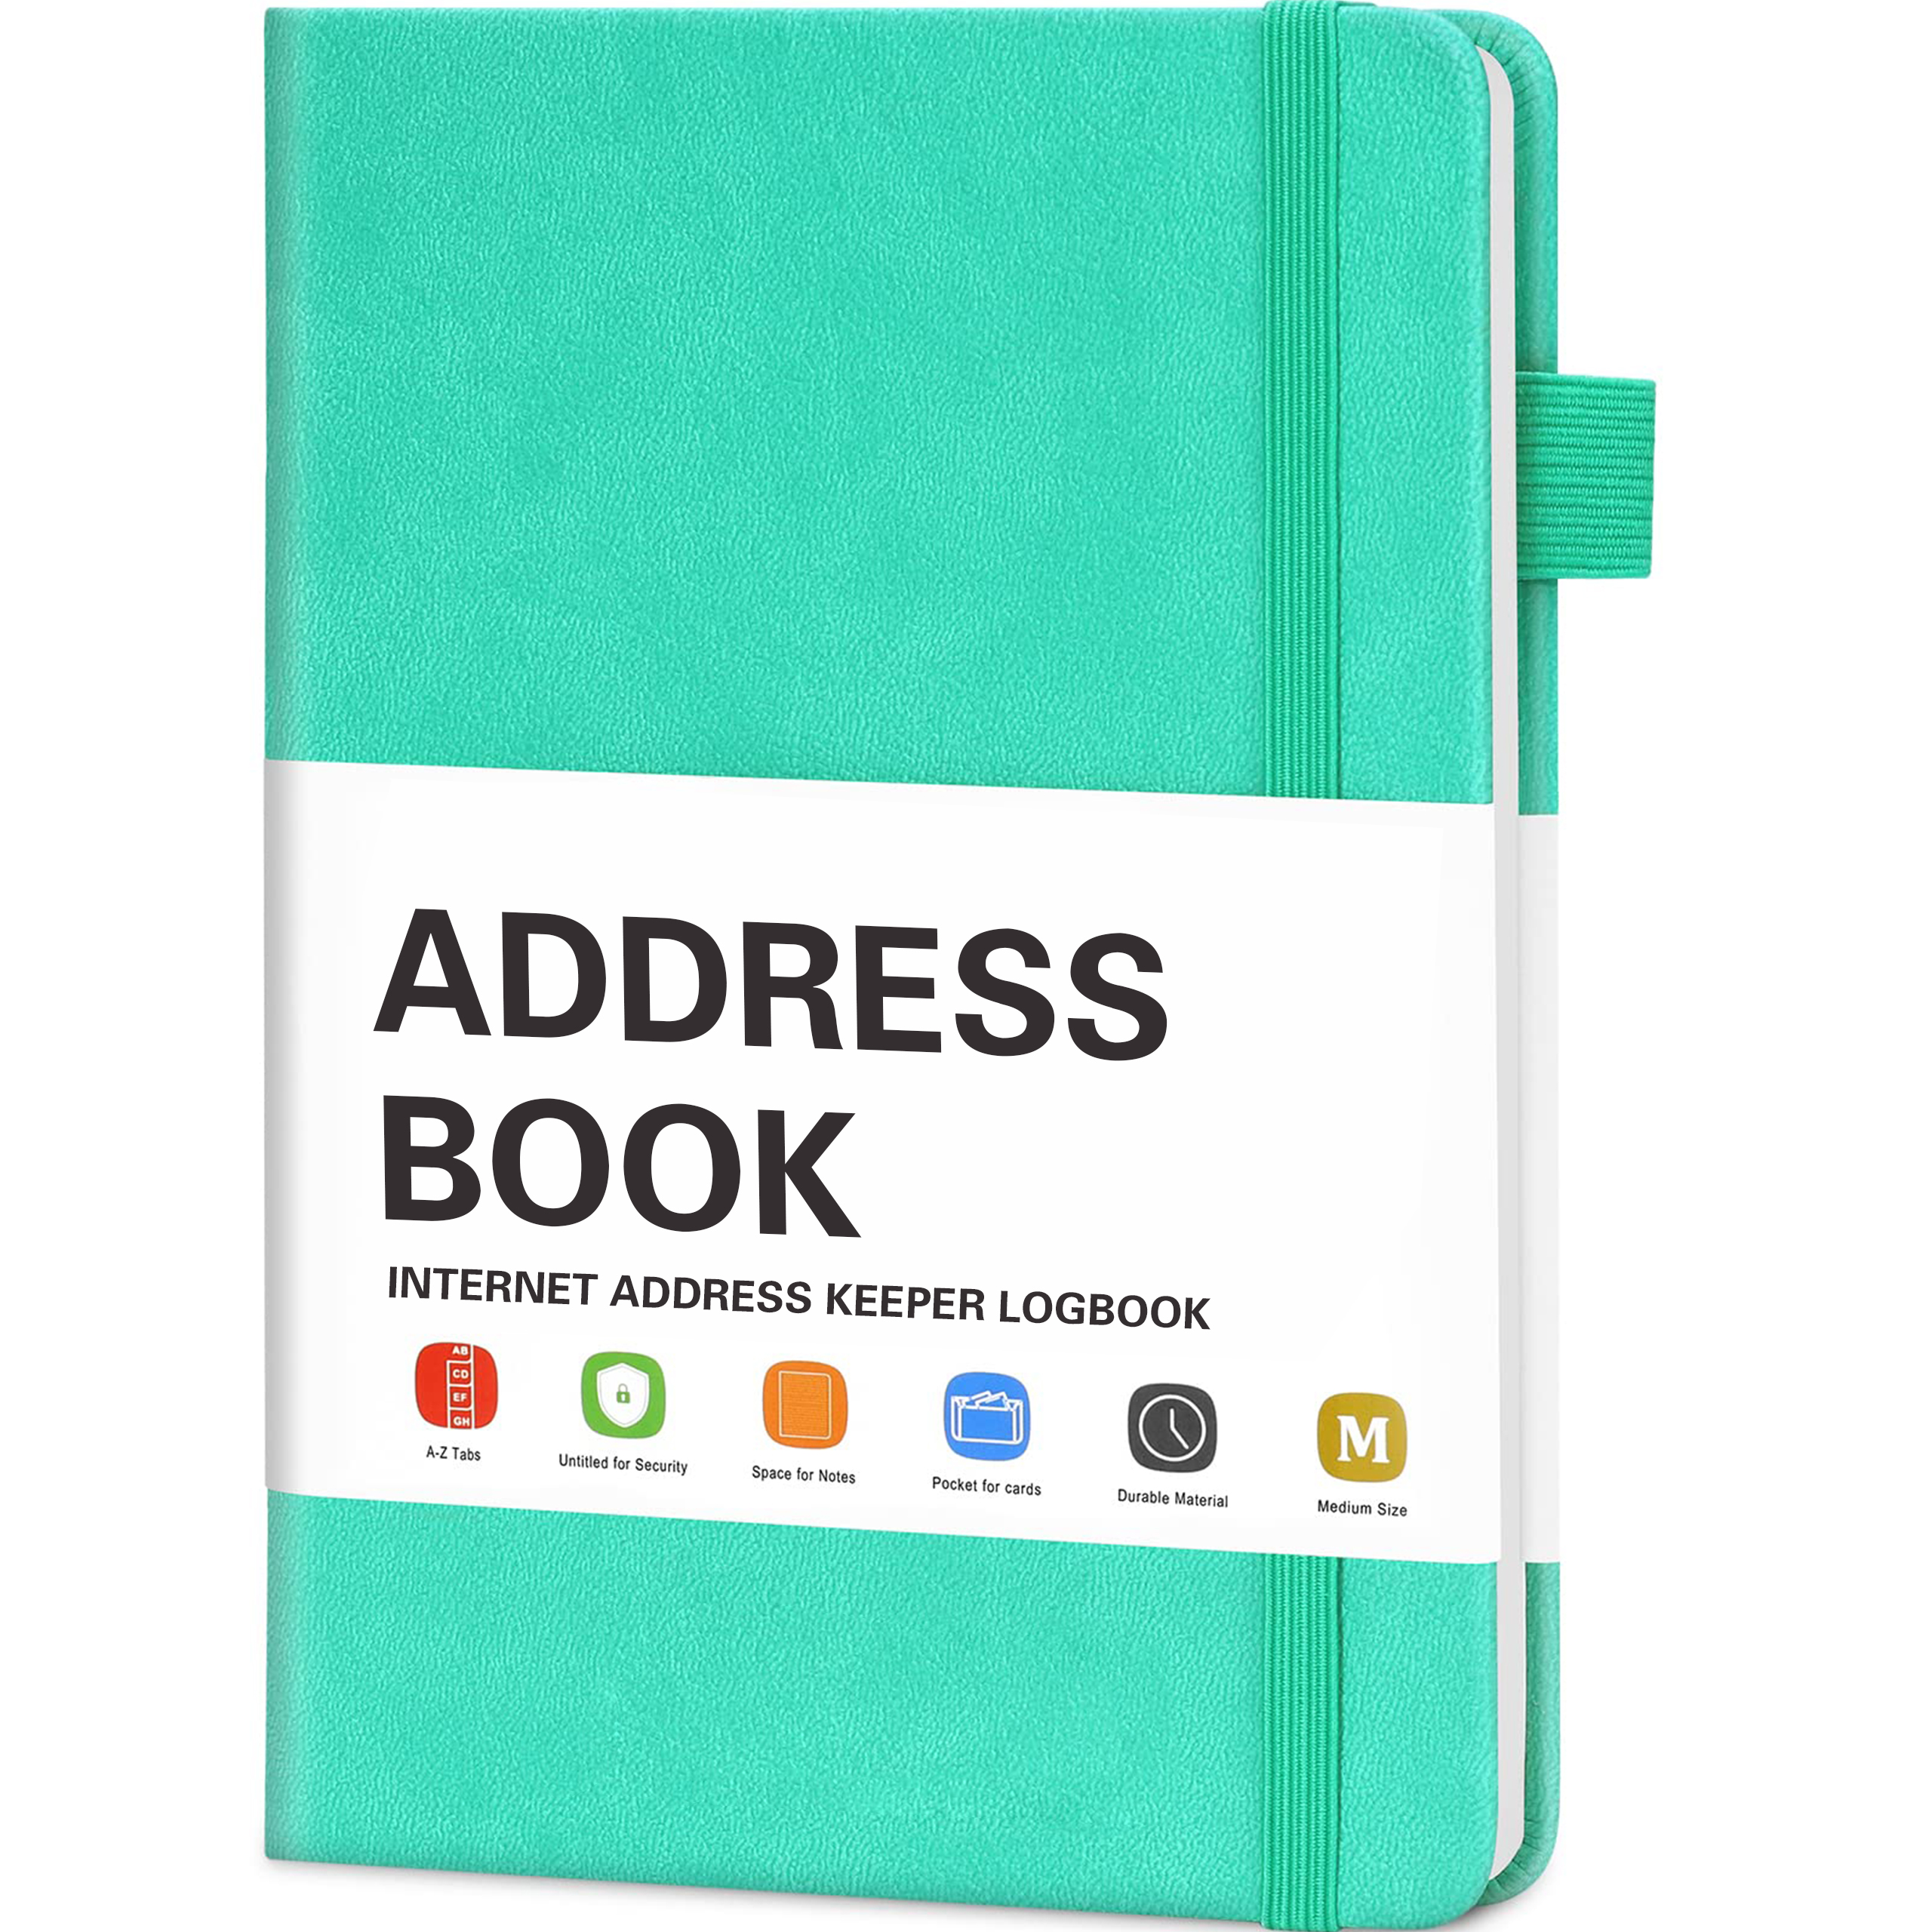 Where to fully customized inner pages and cover of the password notebook?